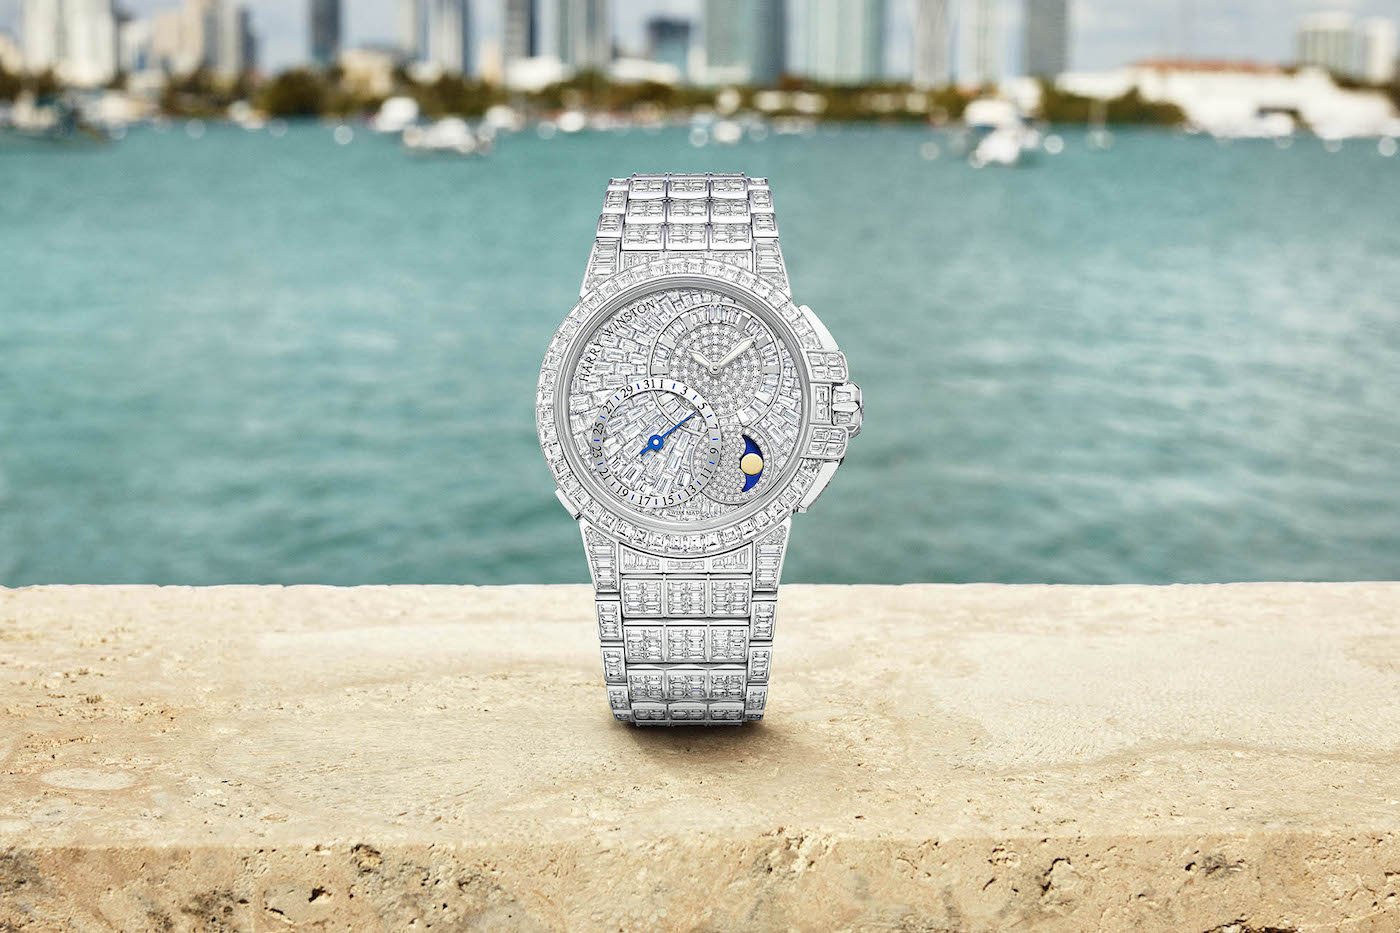 Harry Winston celebrates the 25th anniversary of the Ocean Collection